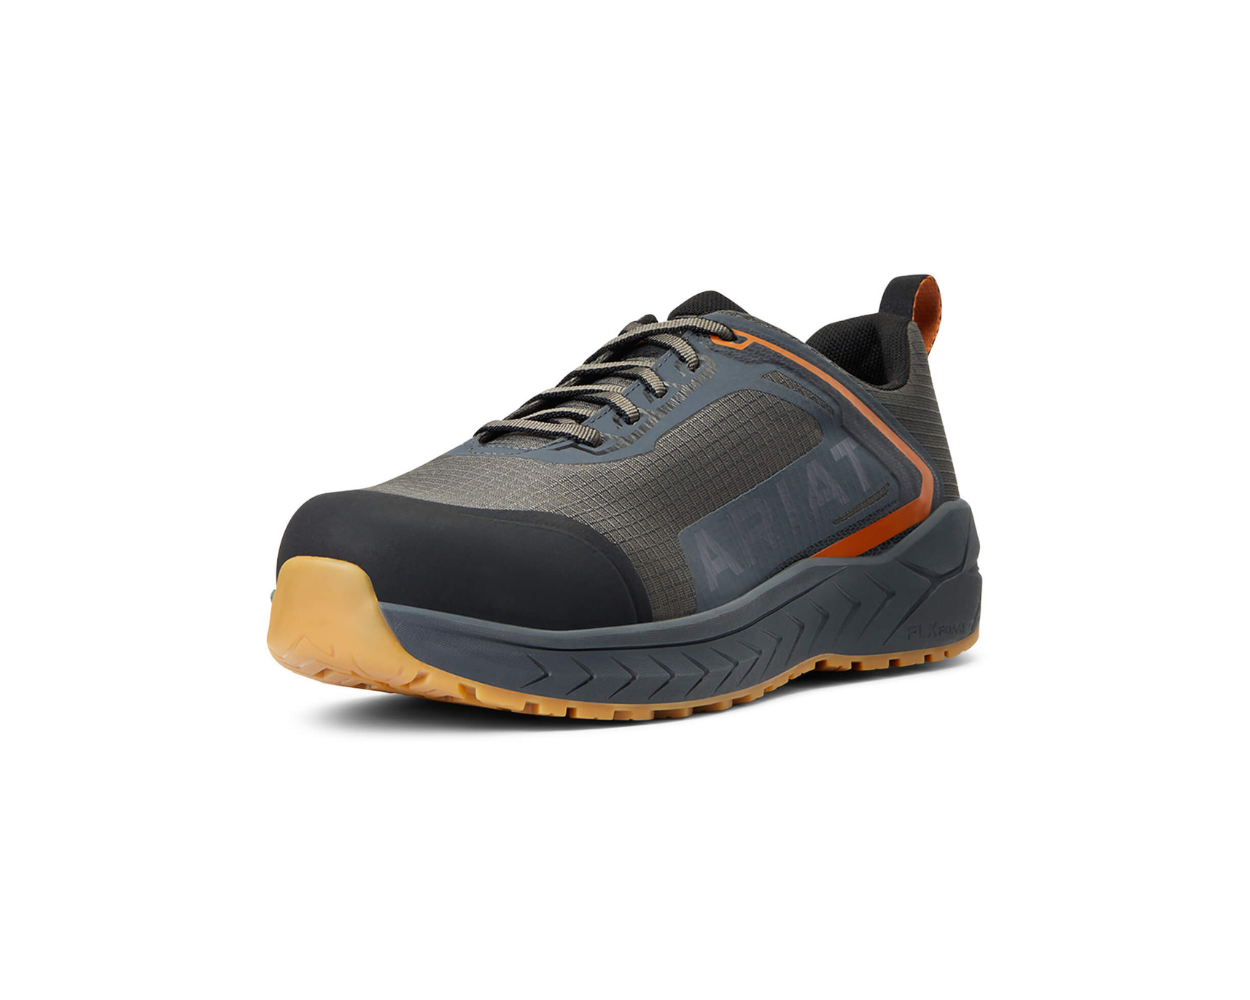 OUTPACE COMPOSITE TOE SAFETY SHOE BY ARIAT, 48% OFF